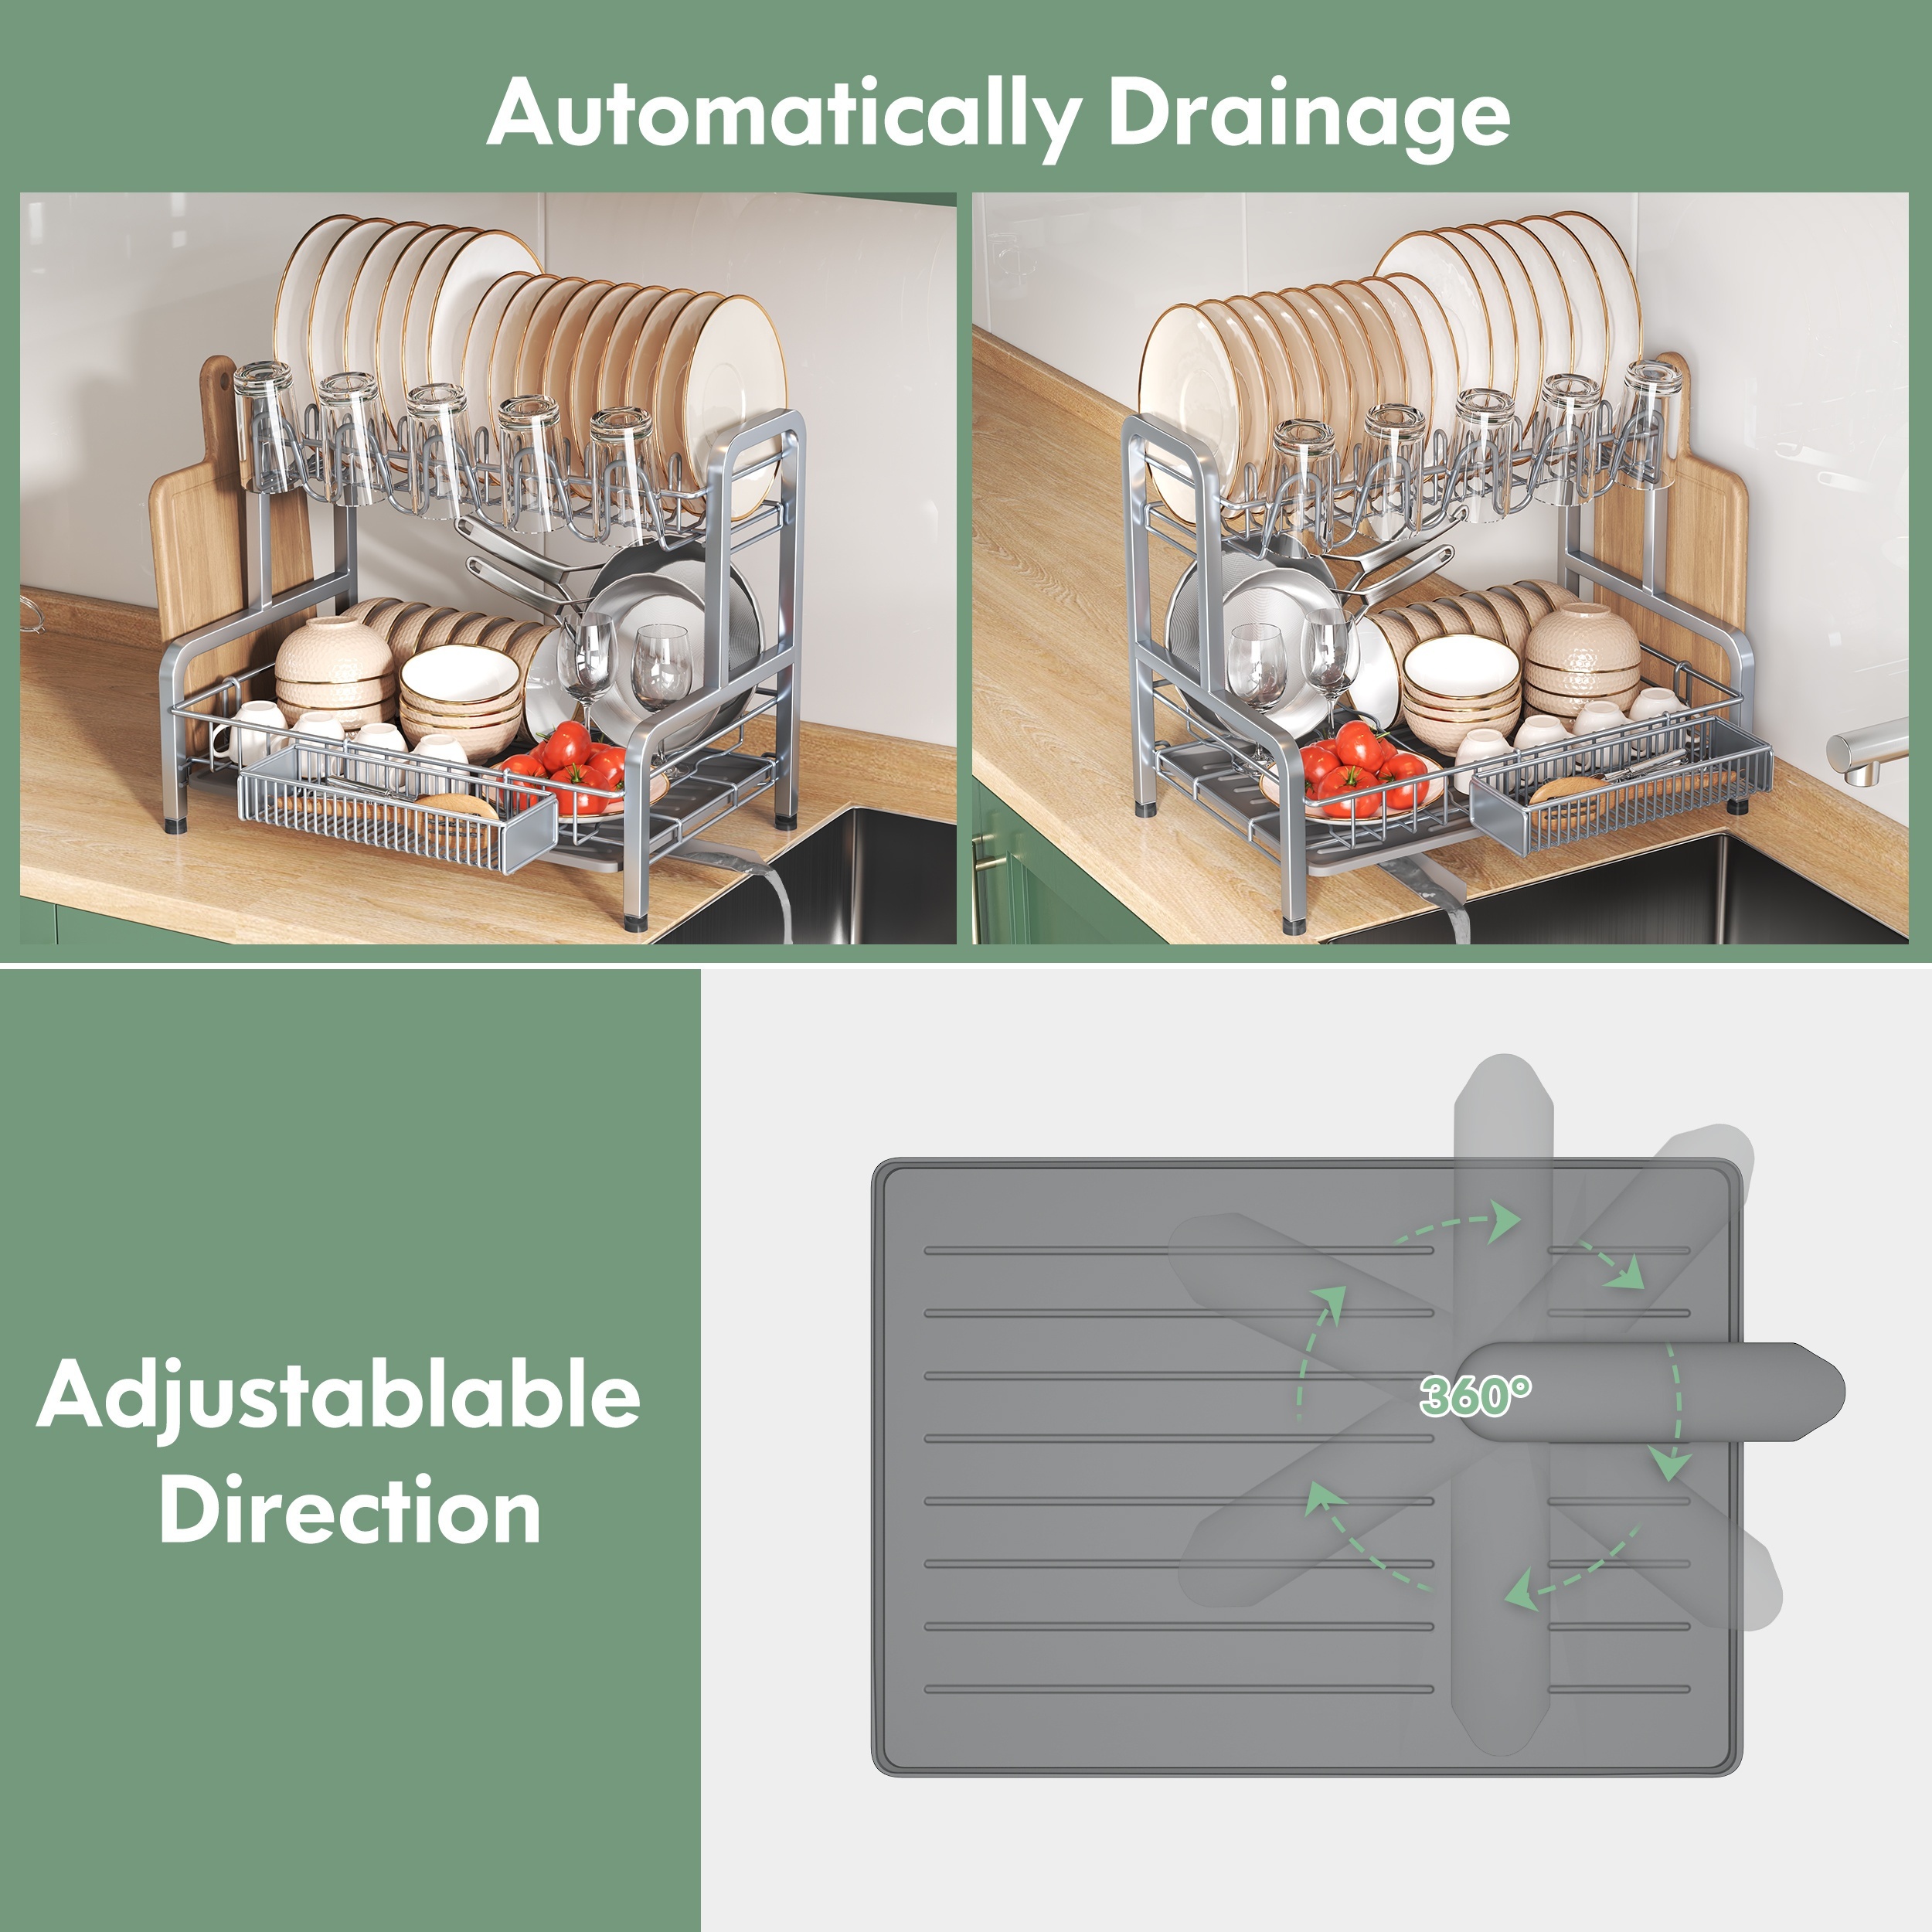 romision Dish Drying Rack and Drainboard Set, 2 Tier Large Stainless Steel  Sink Organizer Dish Racks